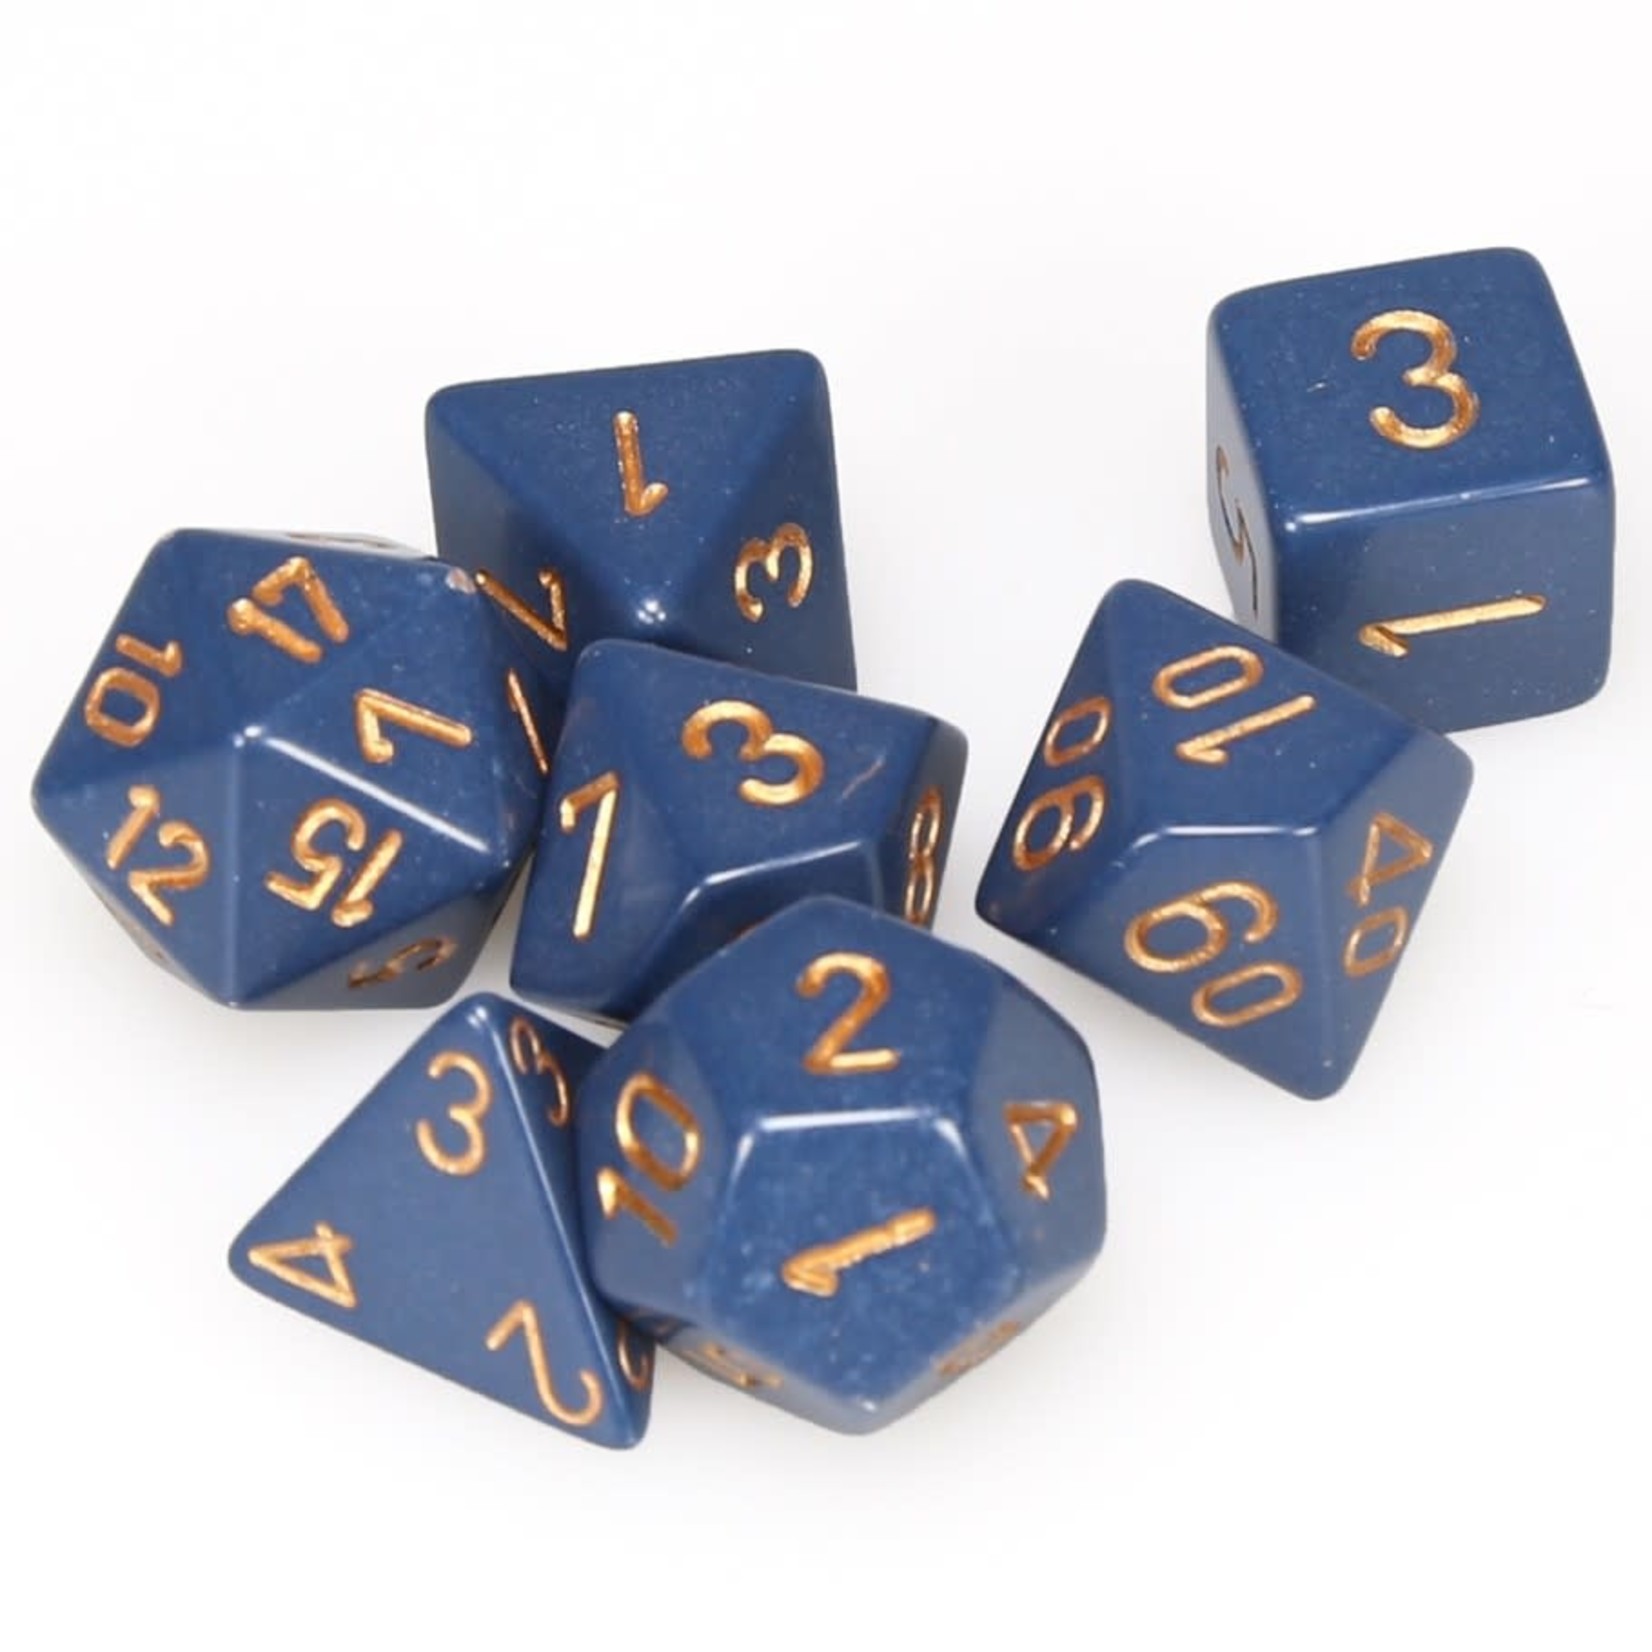 Chessex Dice: 7-Set Opaque Dusty Blue with Copper Numbers (Chessex)